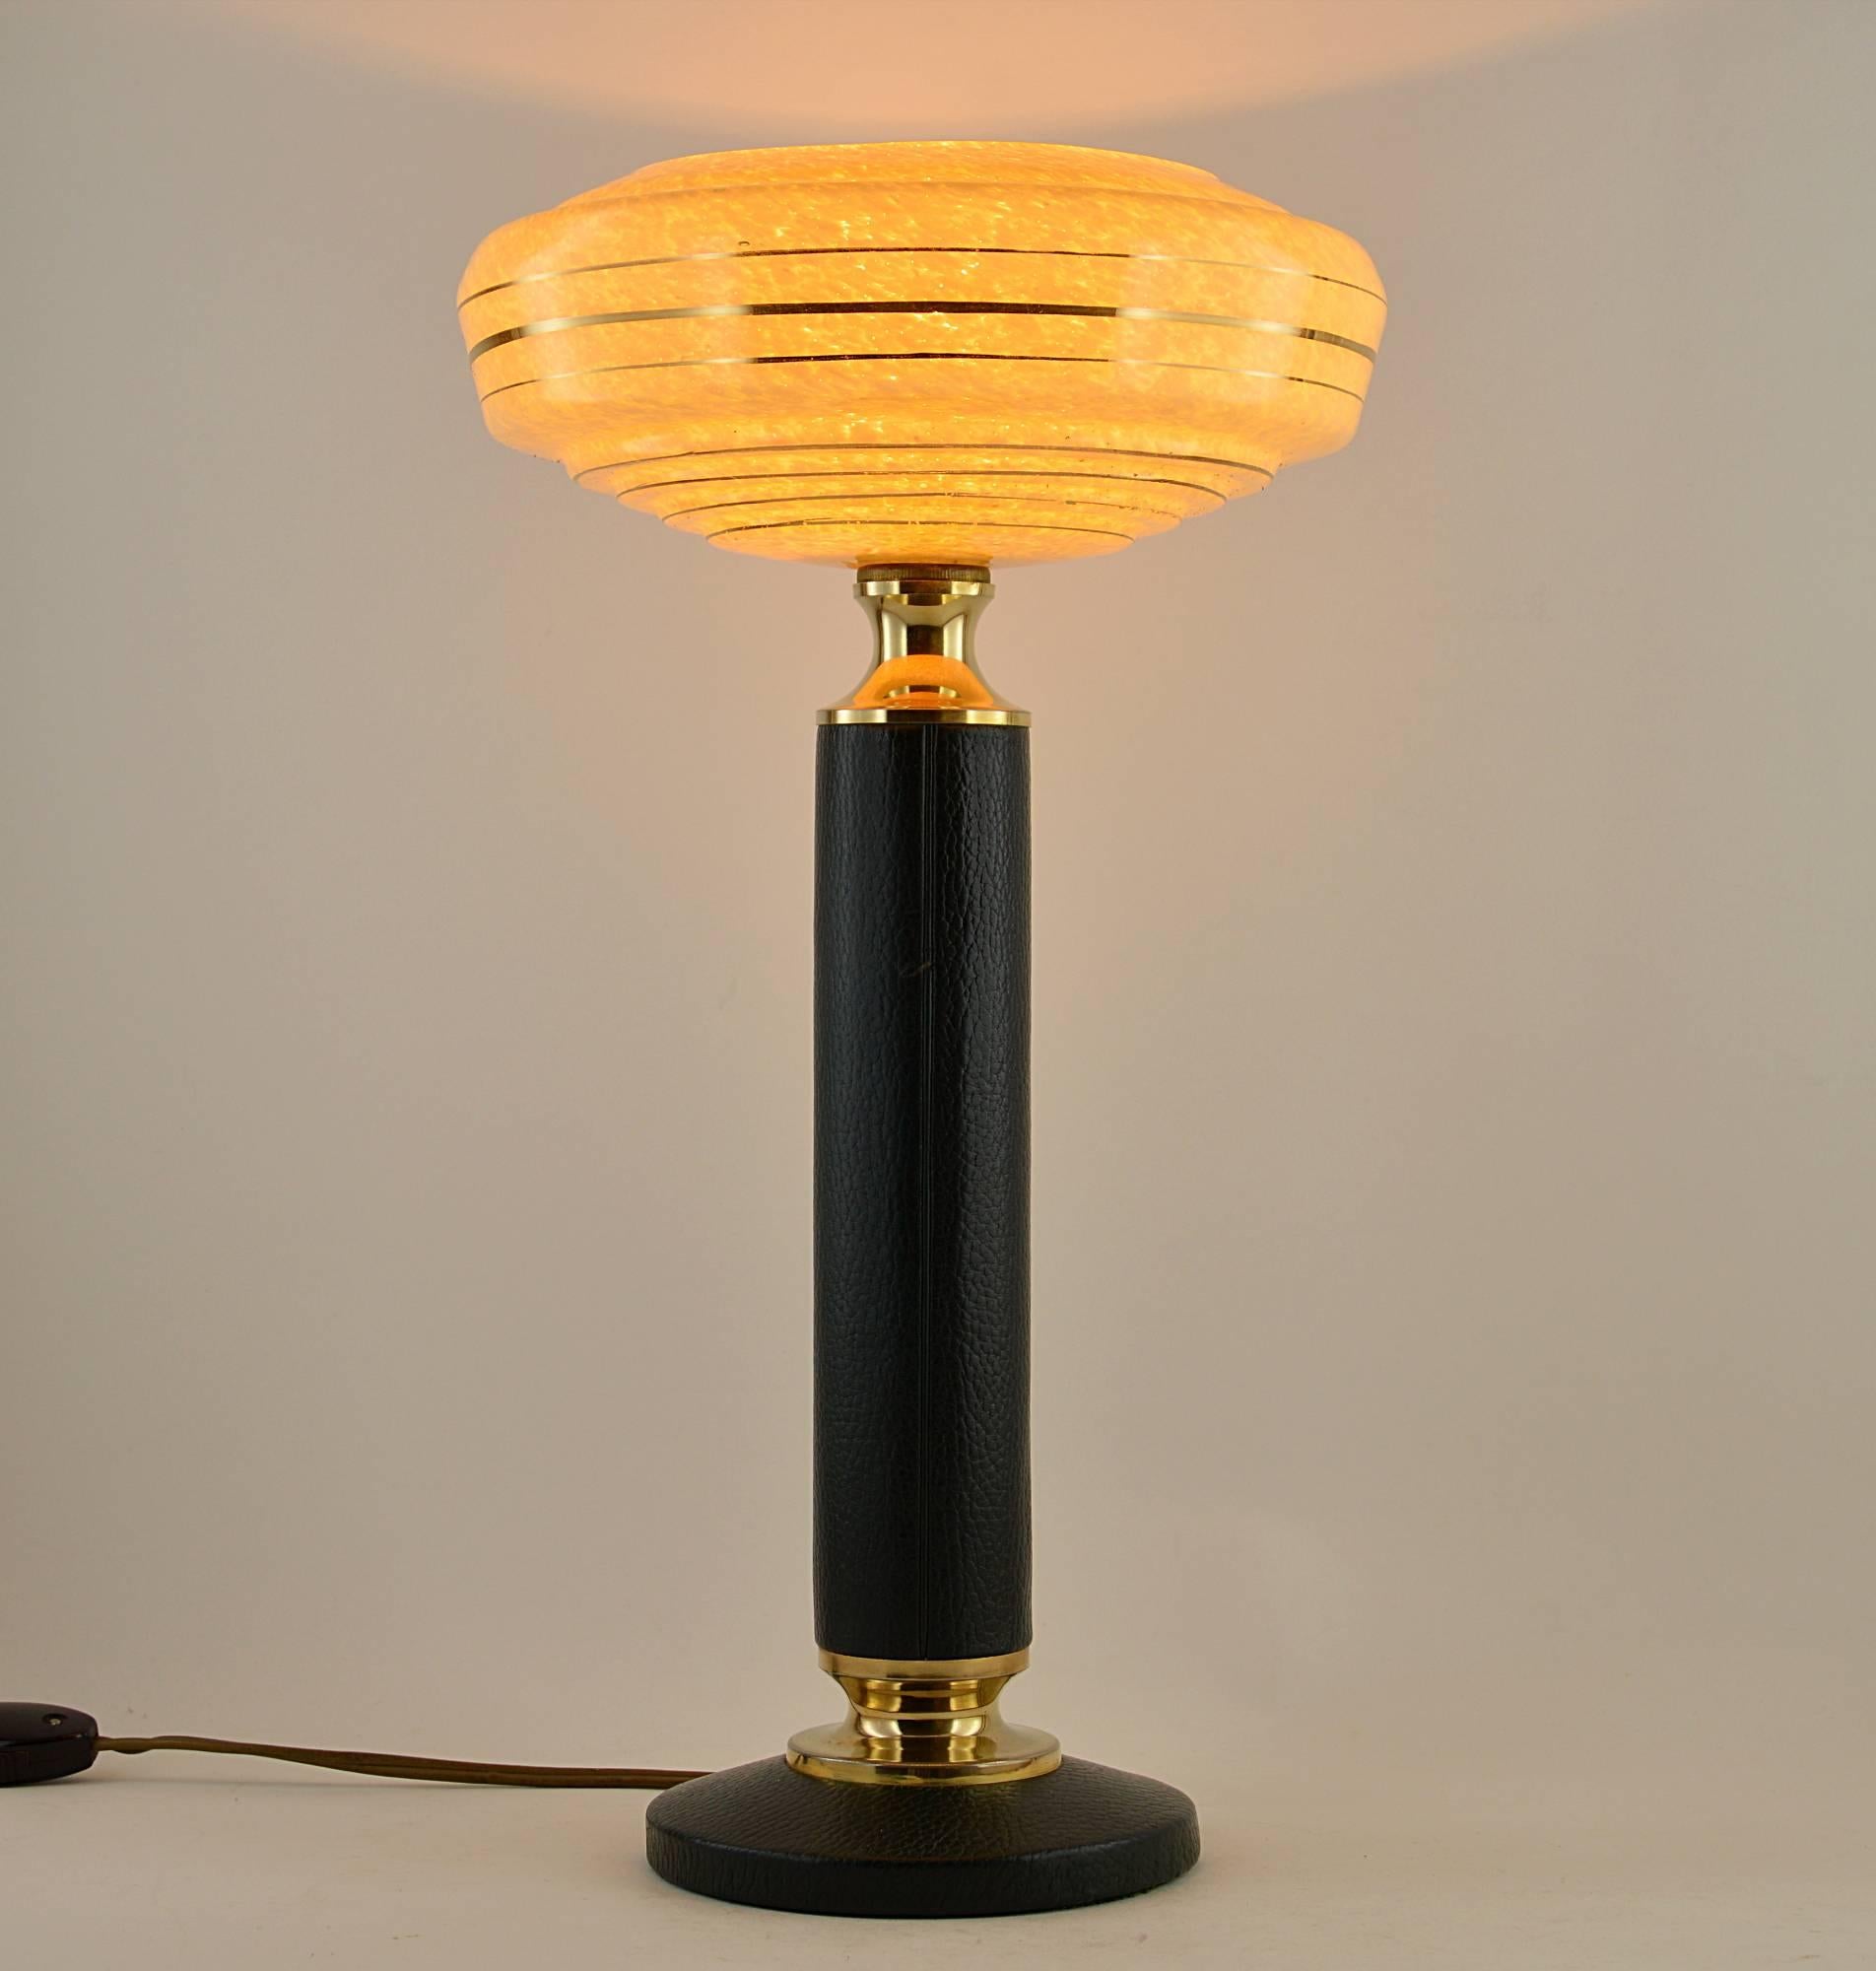 French Art Deco leather table lamp in the style of Jacques Adnet, circa 1940. A superb large glass shade flecked with yellow wearing golden concentric stripes on a bottle-green leather and brass base. Delivered wired with a B22 socket for your